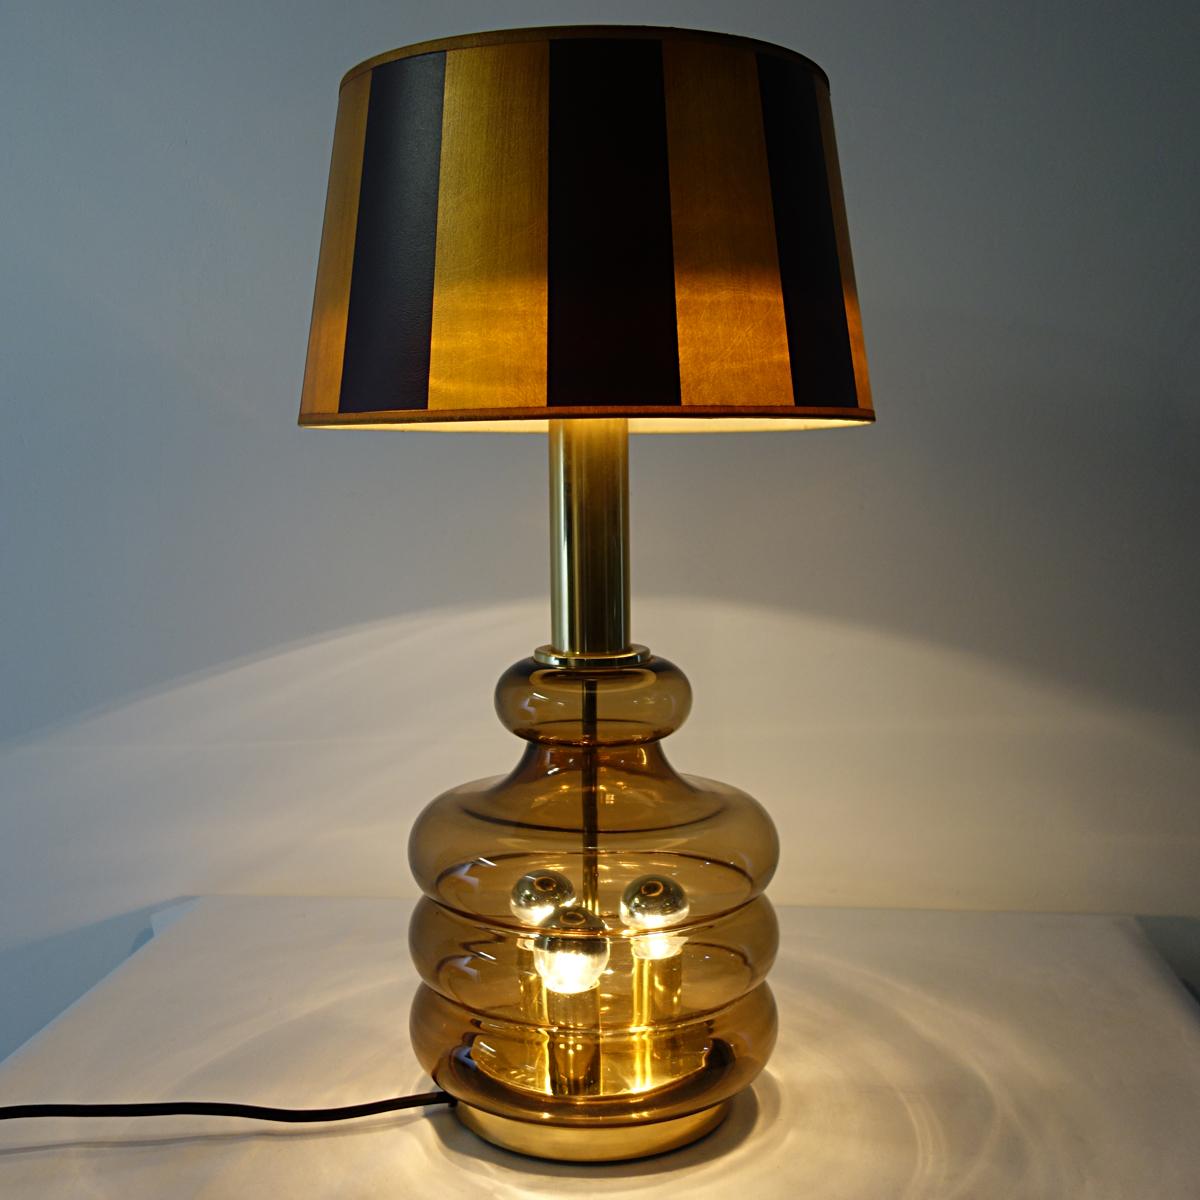 20th Century Mid-Century Modern Table Lamp Made of Smoked Glass by Doria Leuchten For Sale